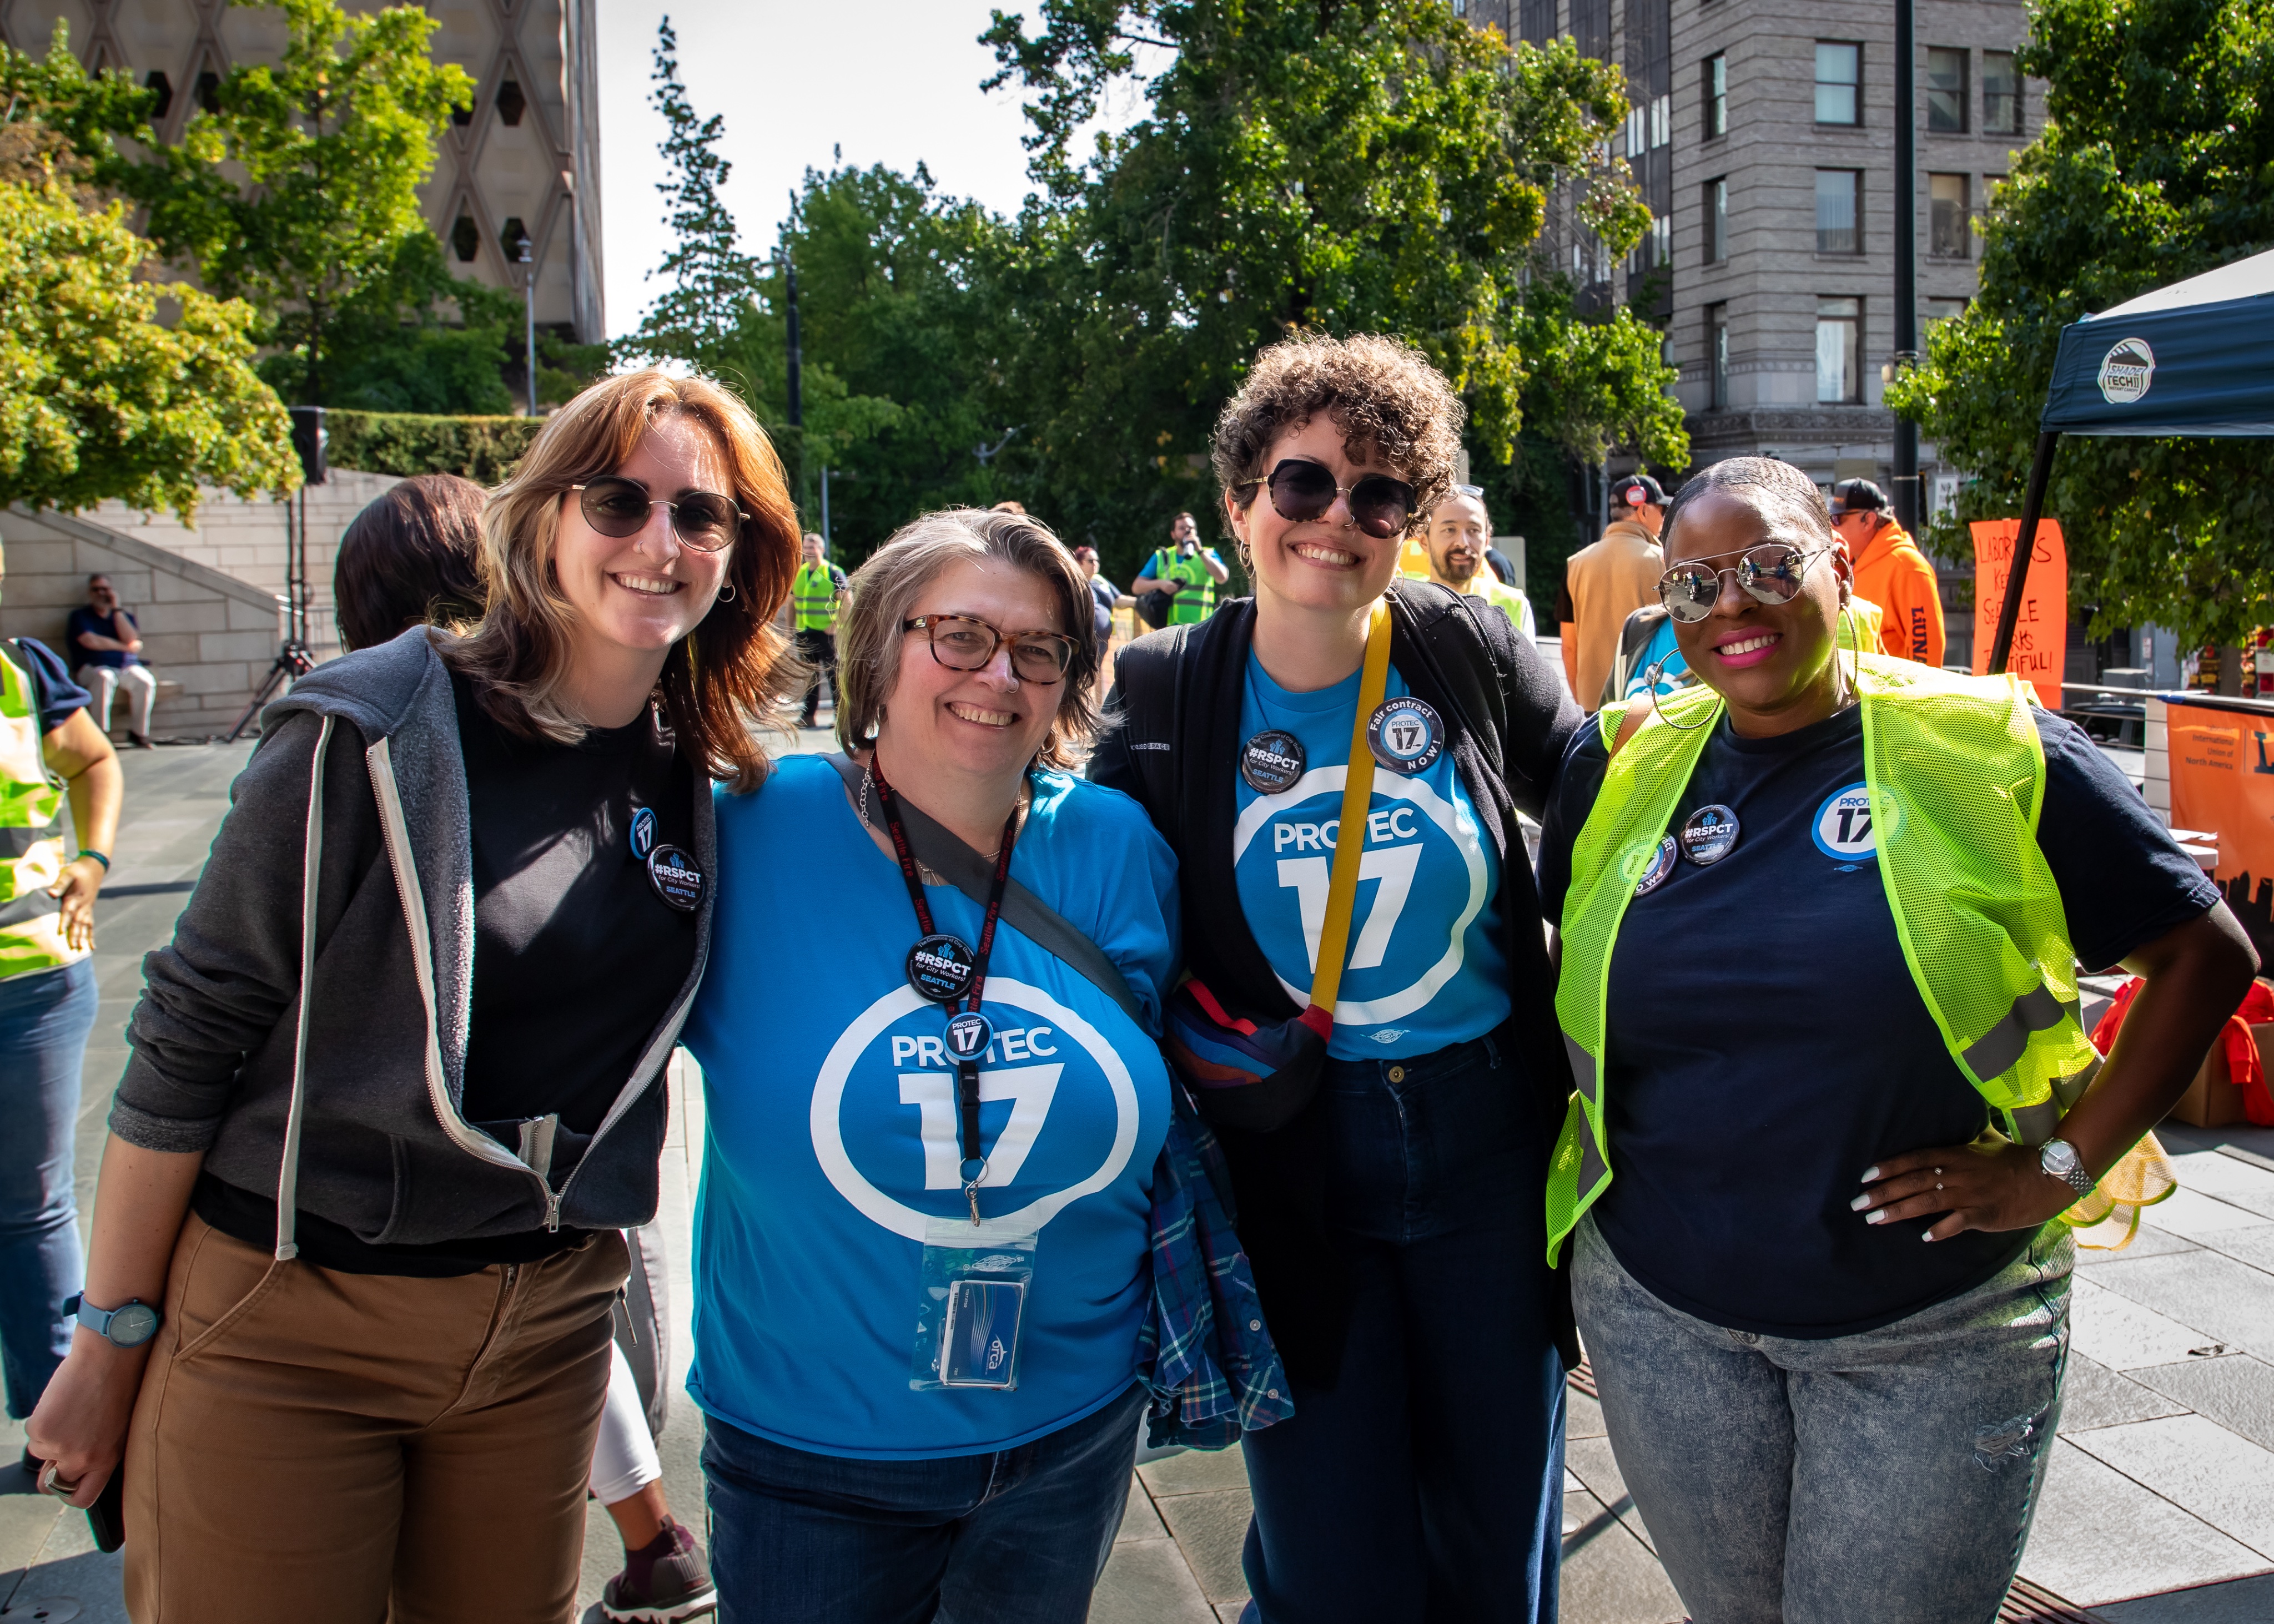 PROTEC17 members and staff smiling outside City Hall in the sun. They are wearing PROTEC17 shirts and buttons.